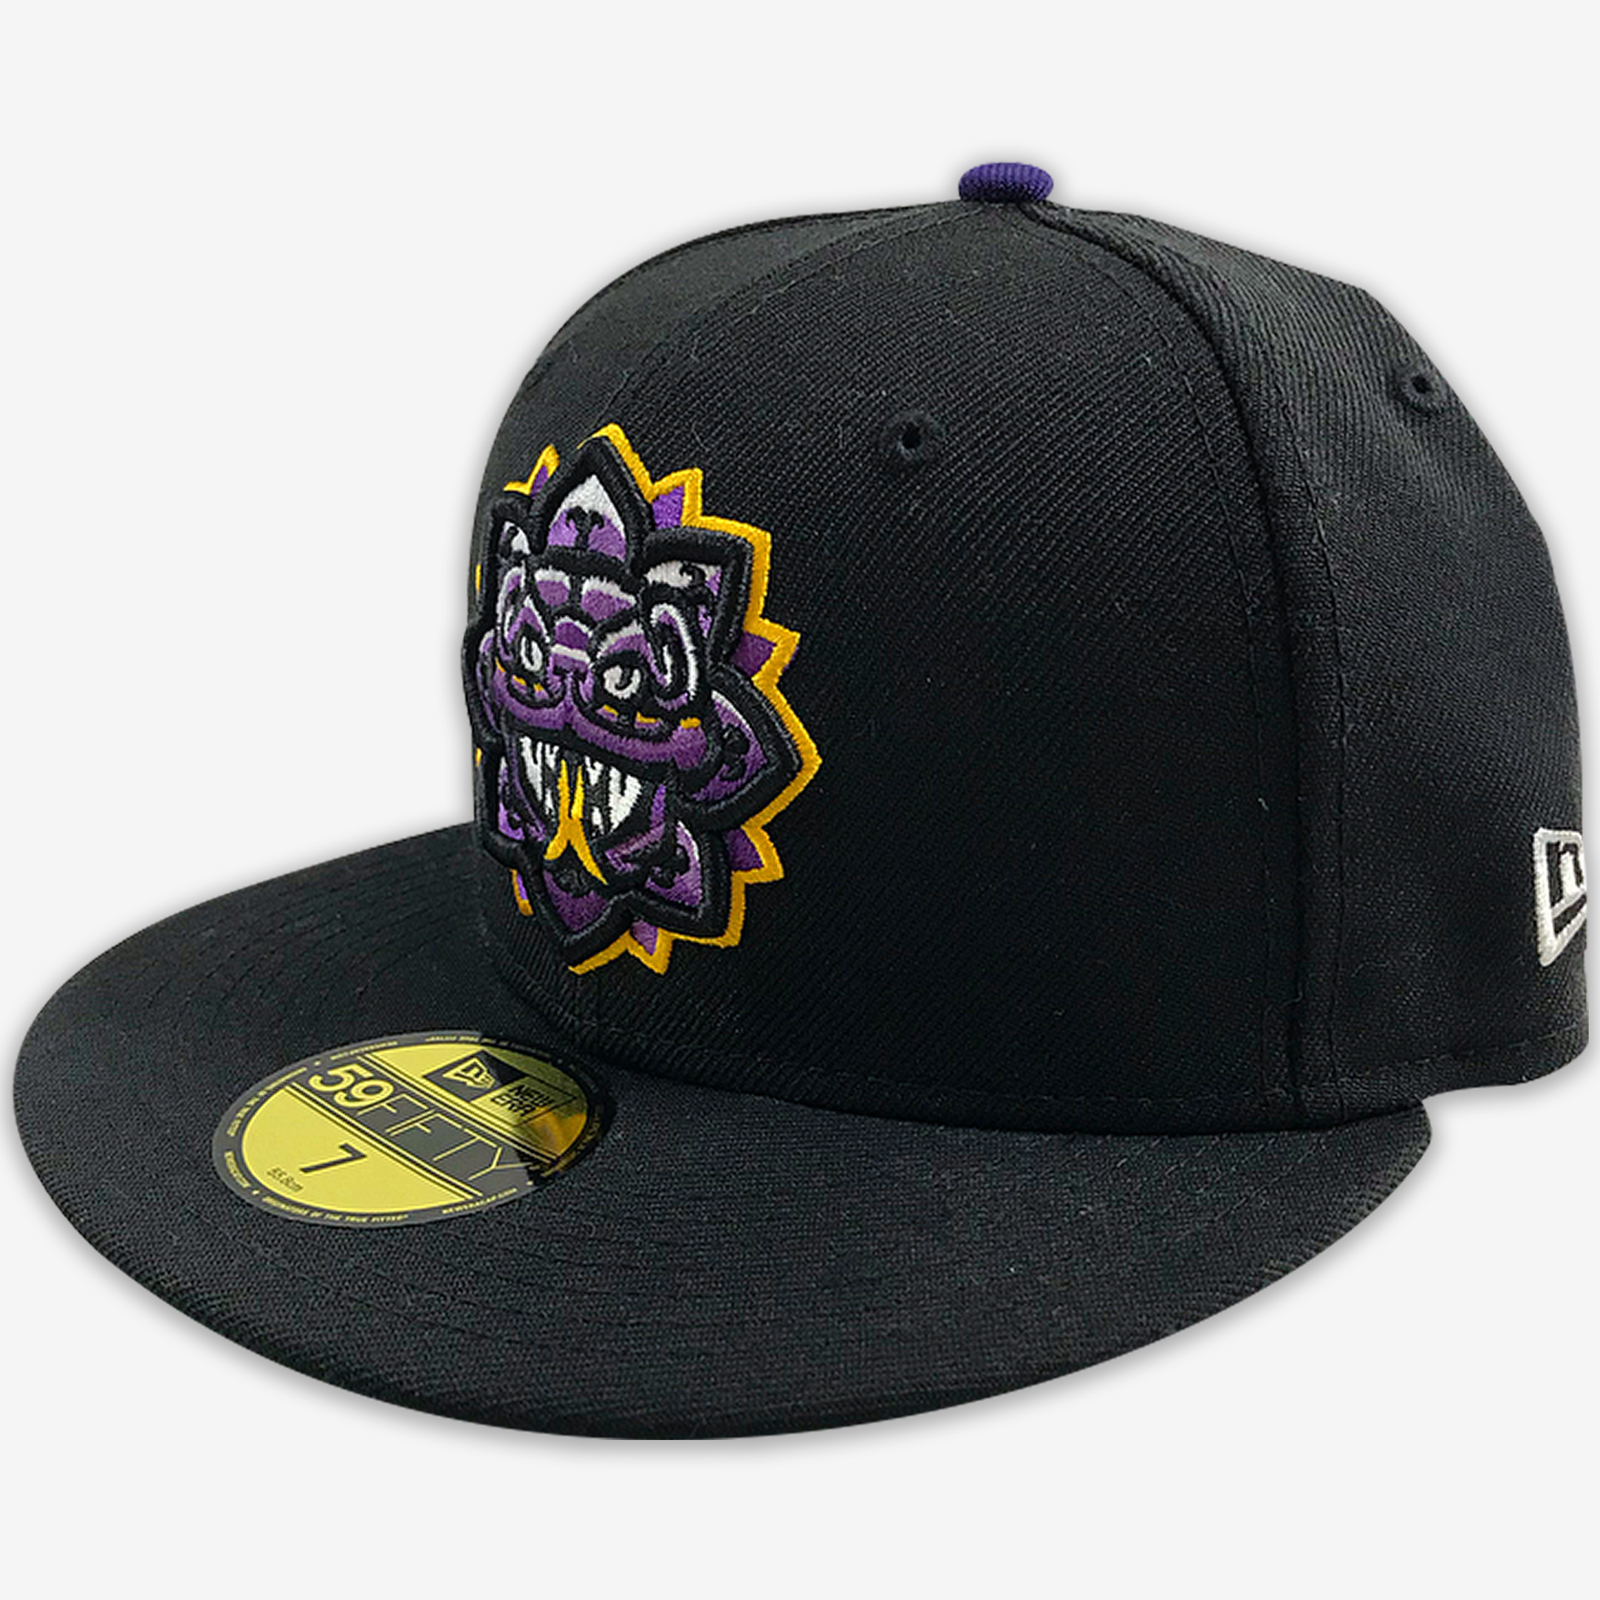 *AOF x River City Giants Quetzalcoatl New Era Fitted